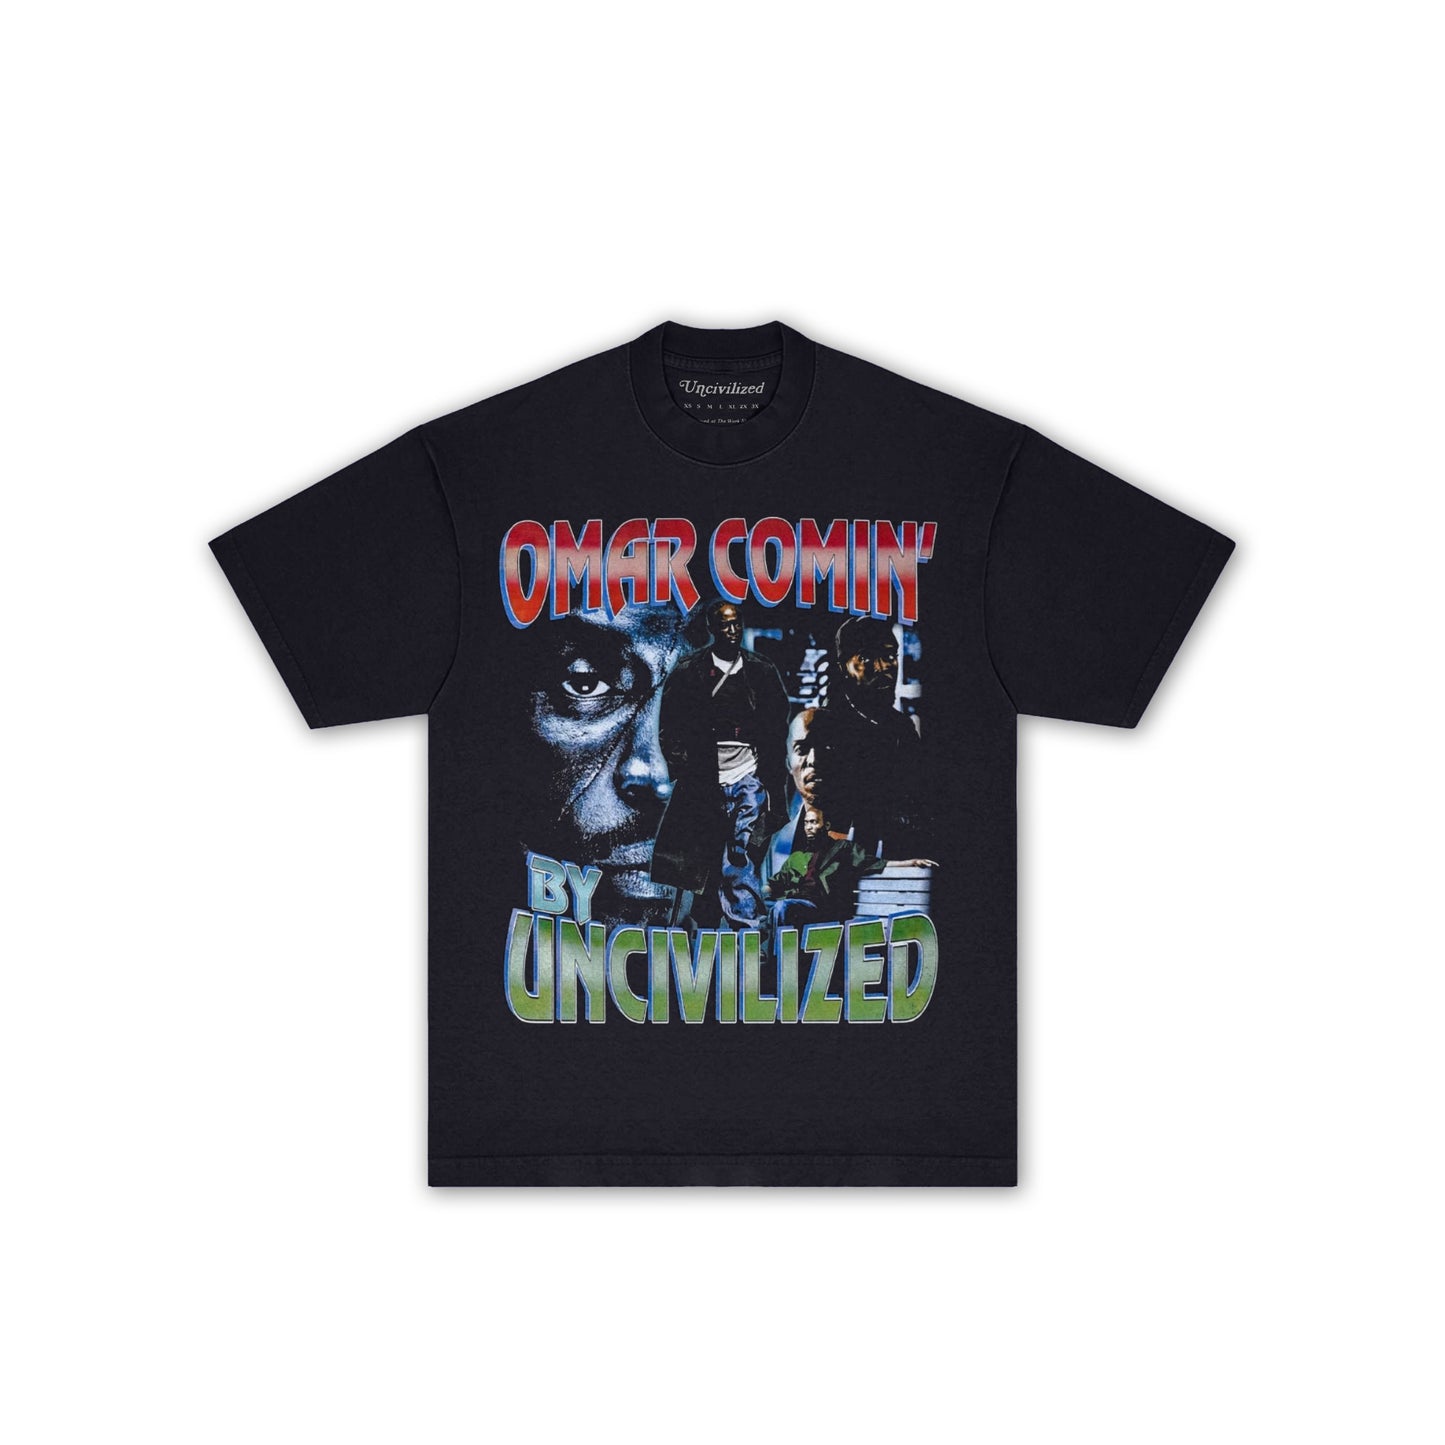 EARLY ACCESS: "OMAR COMIN'" T-SHIRT BY UNCIVILIZED